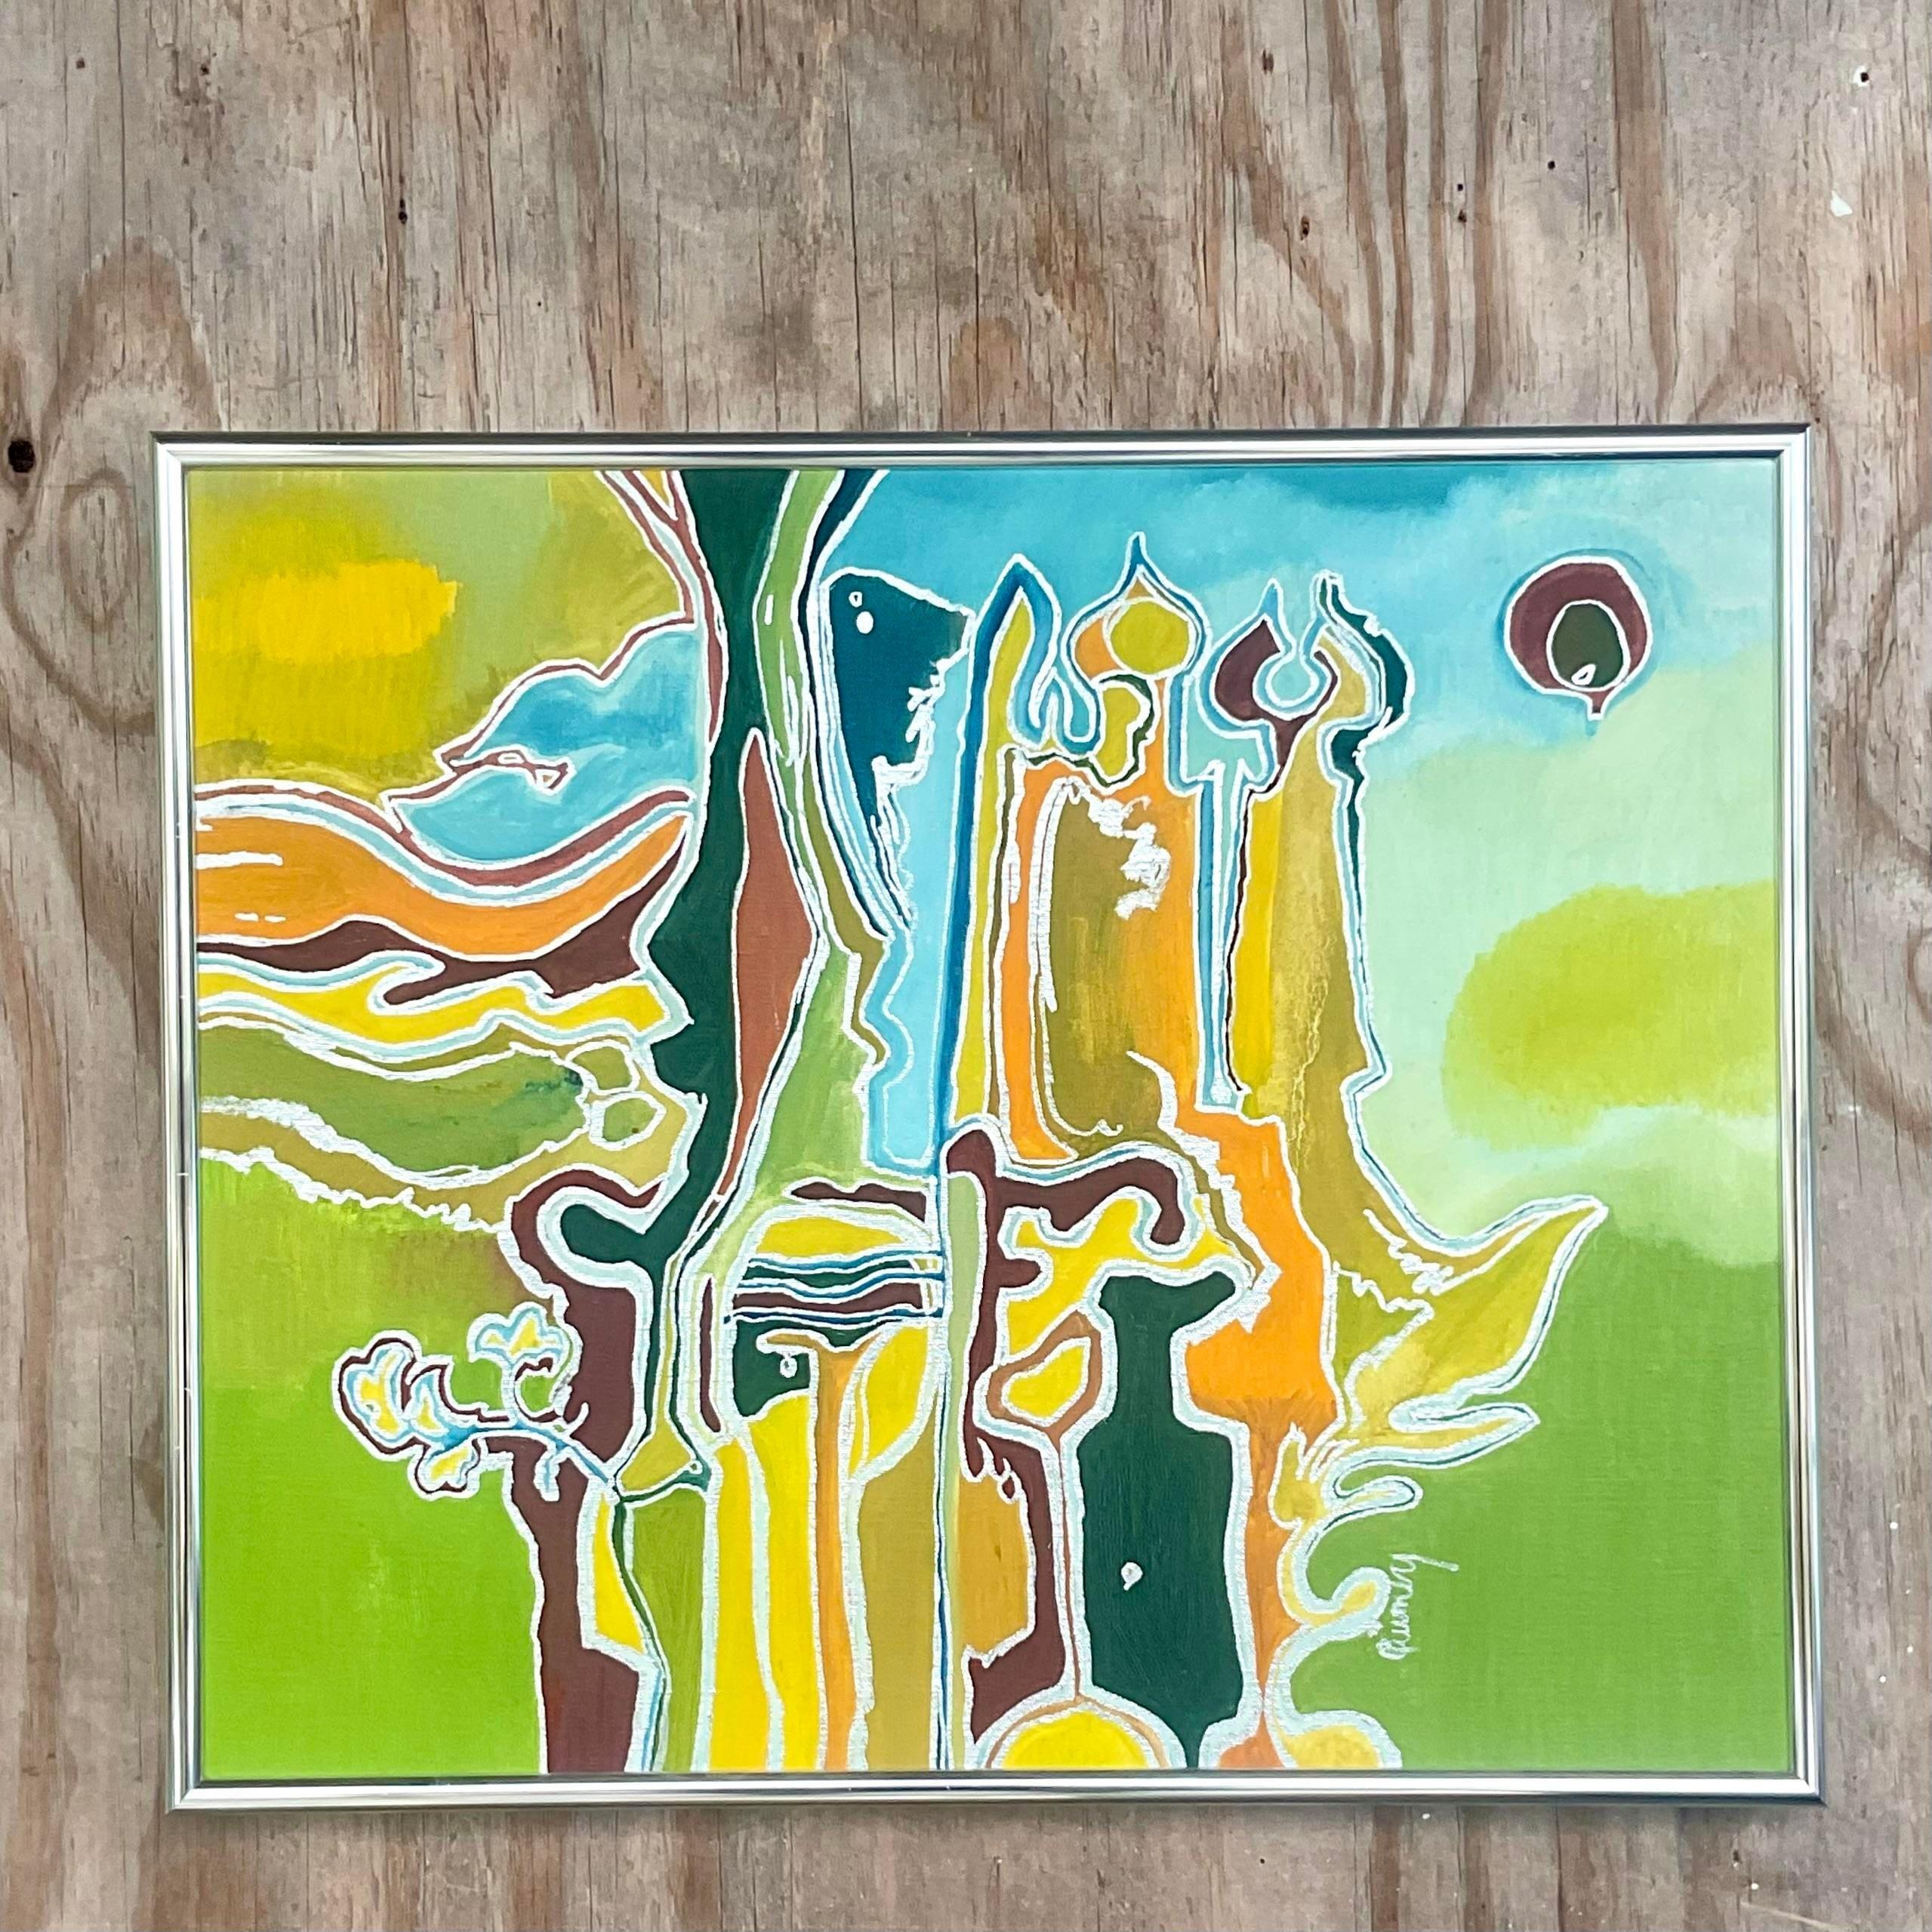 A fantastic vintage Boho original oil on canvas. Brilliant colors in the chic Abstract composition. Signed by the artist. Acquired from a Palm Beach estate. 